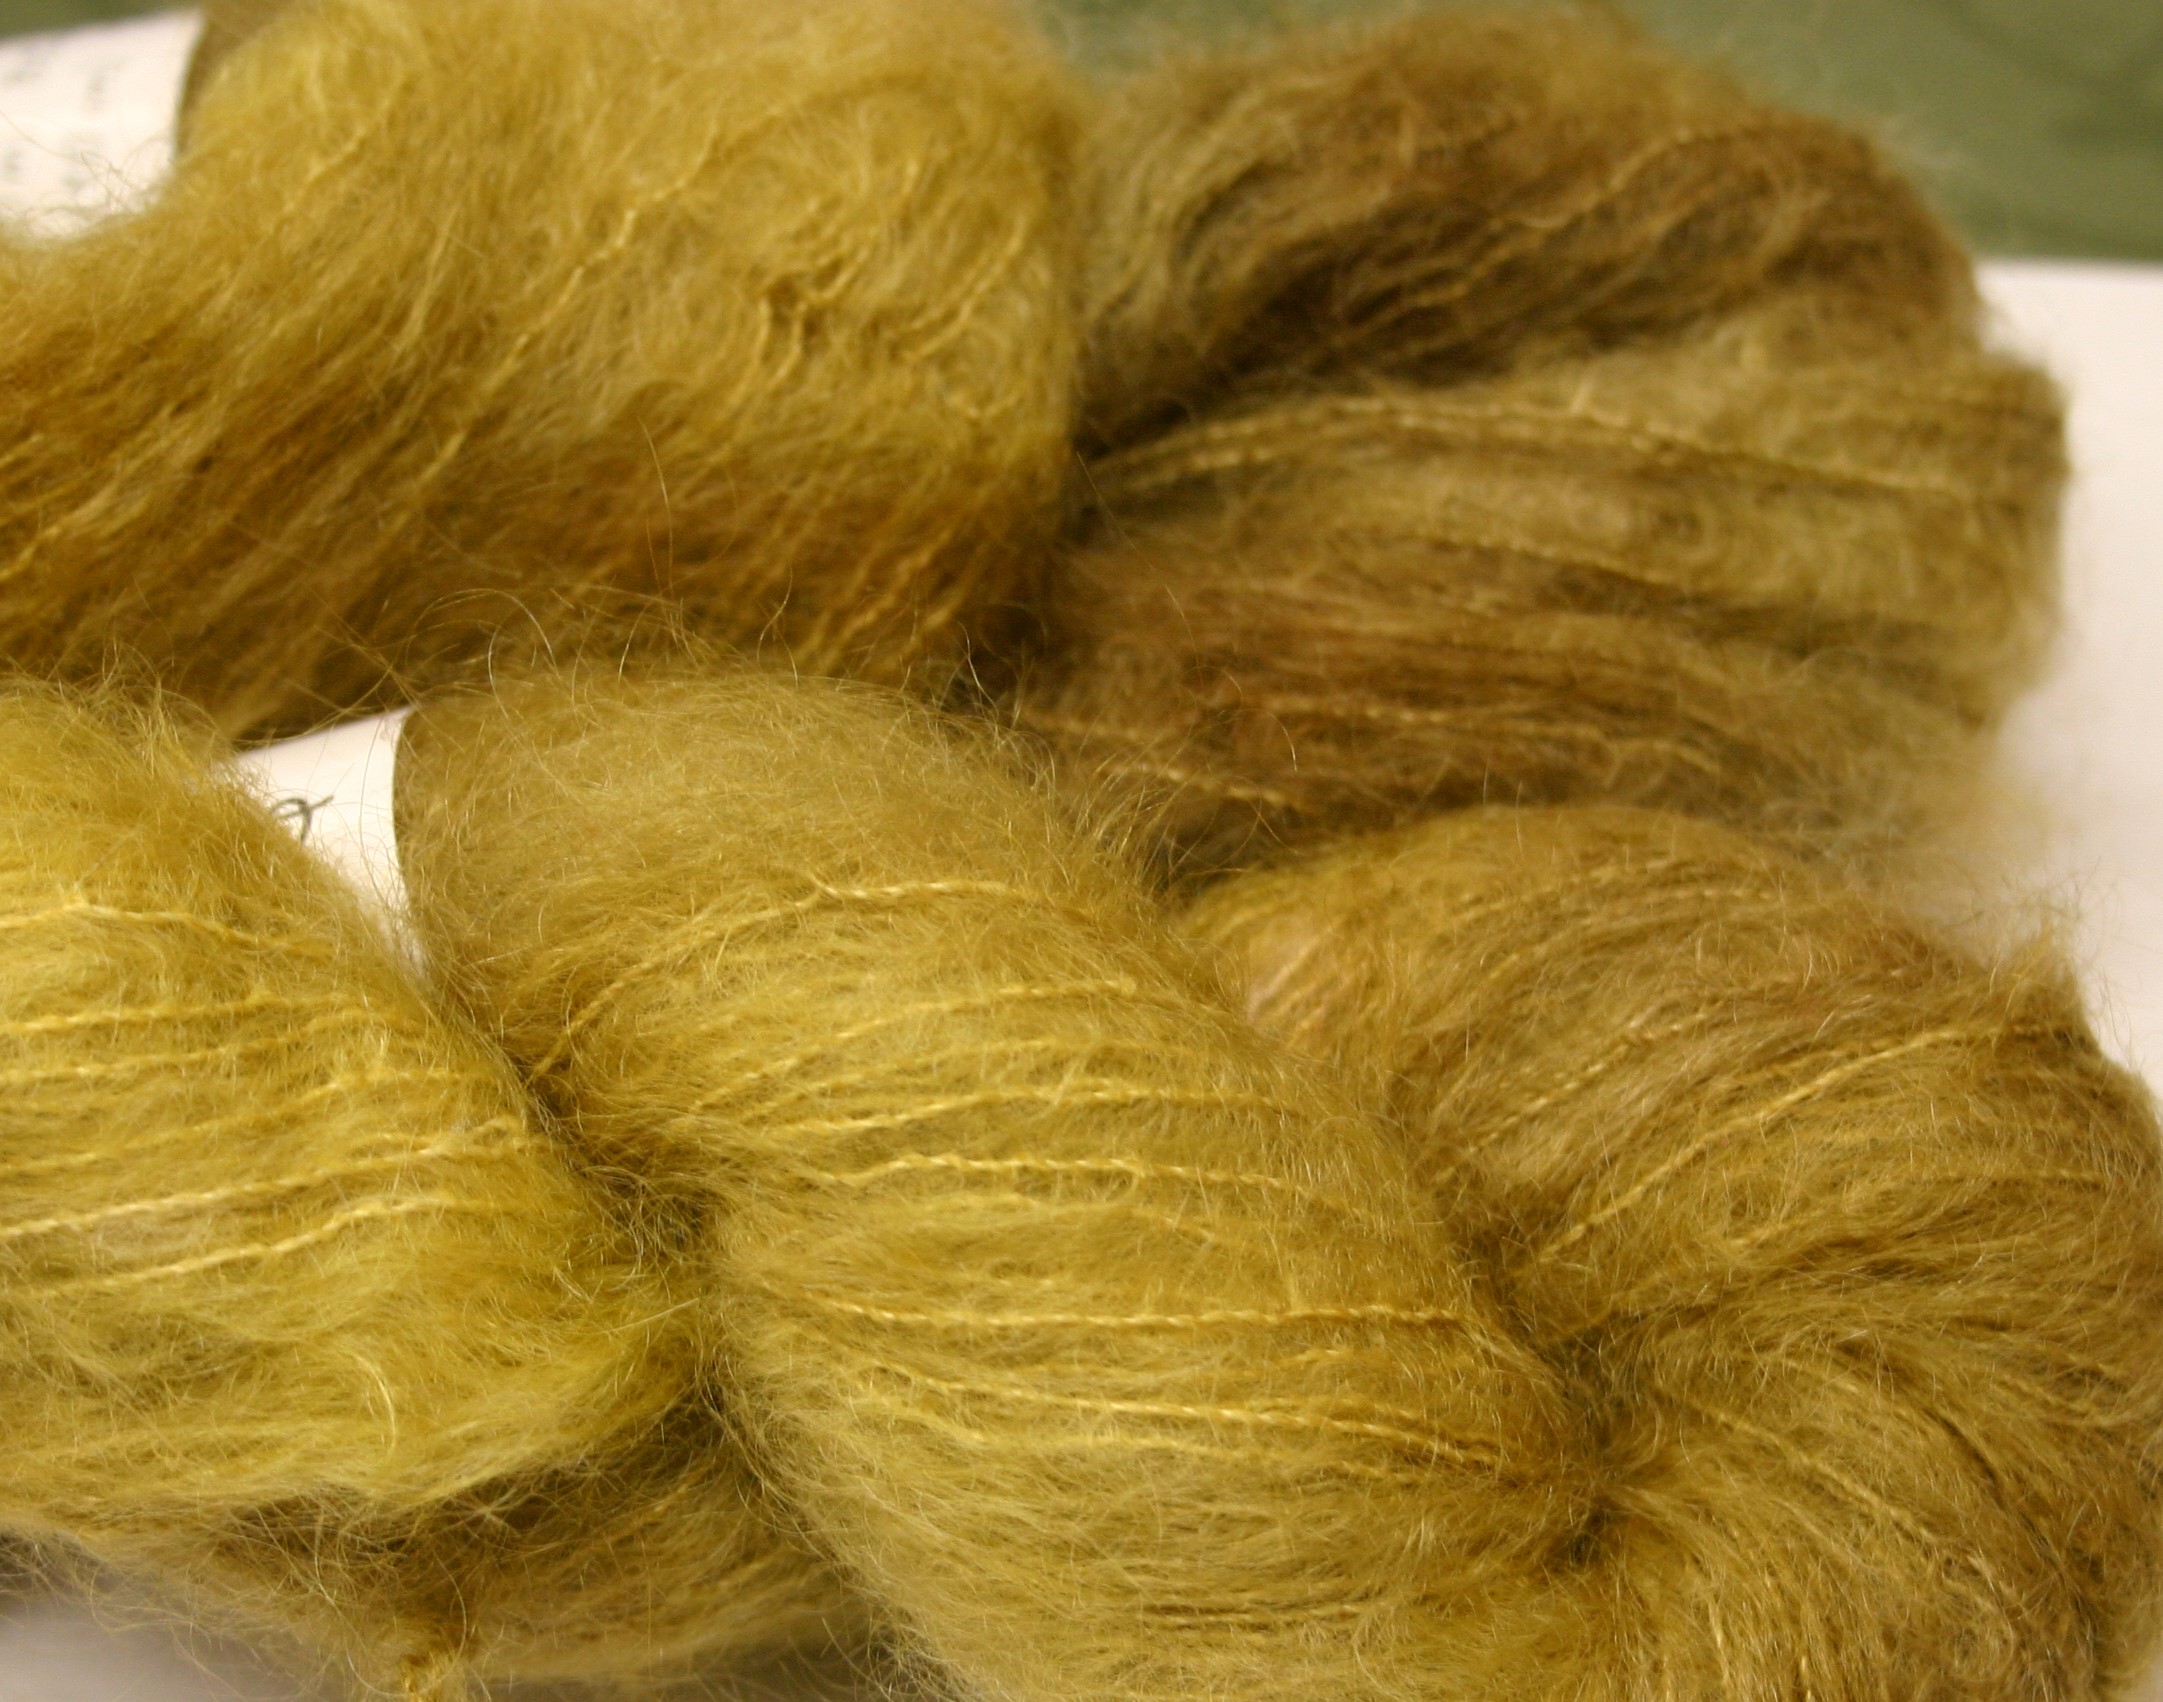 Brushed Mohair Yarn by Bewitching Fibers in Marsh Grass